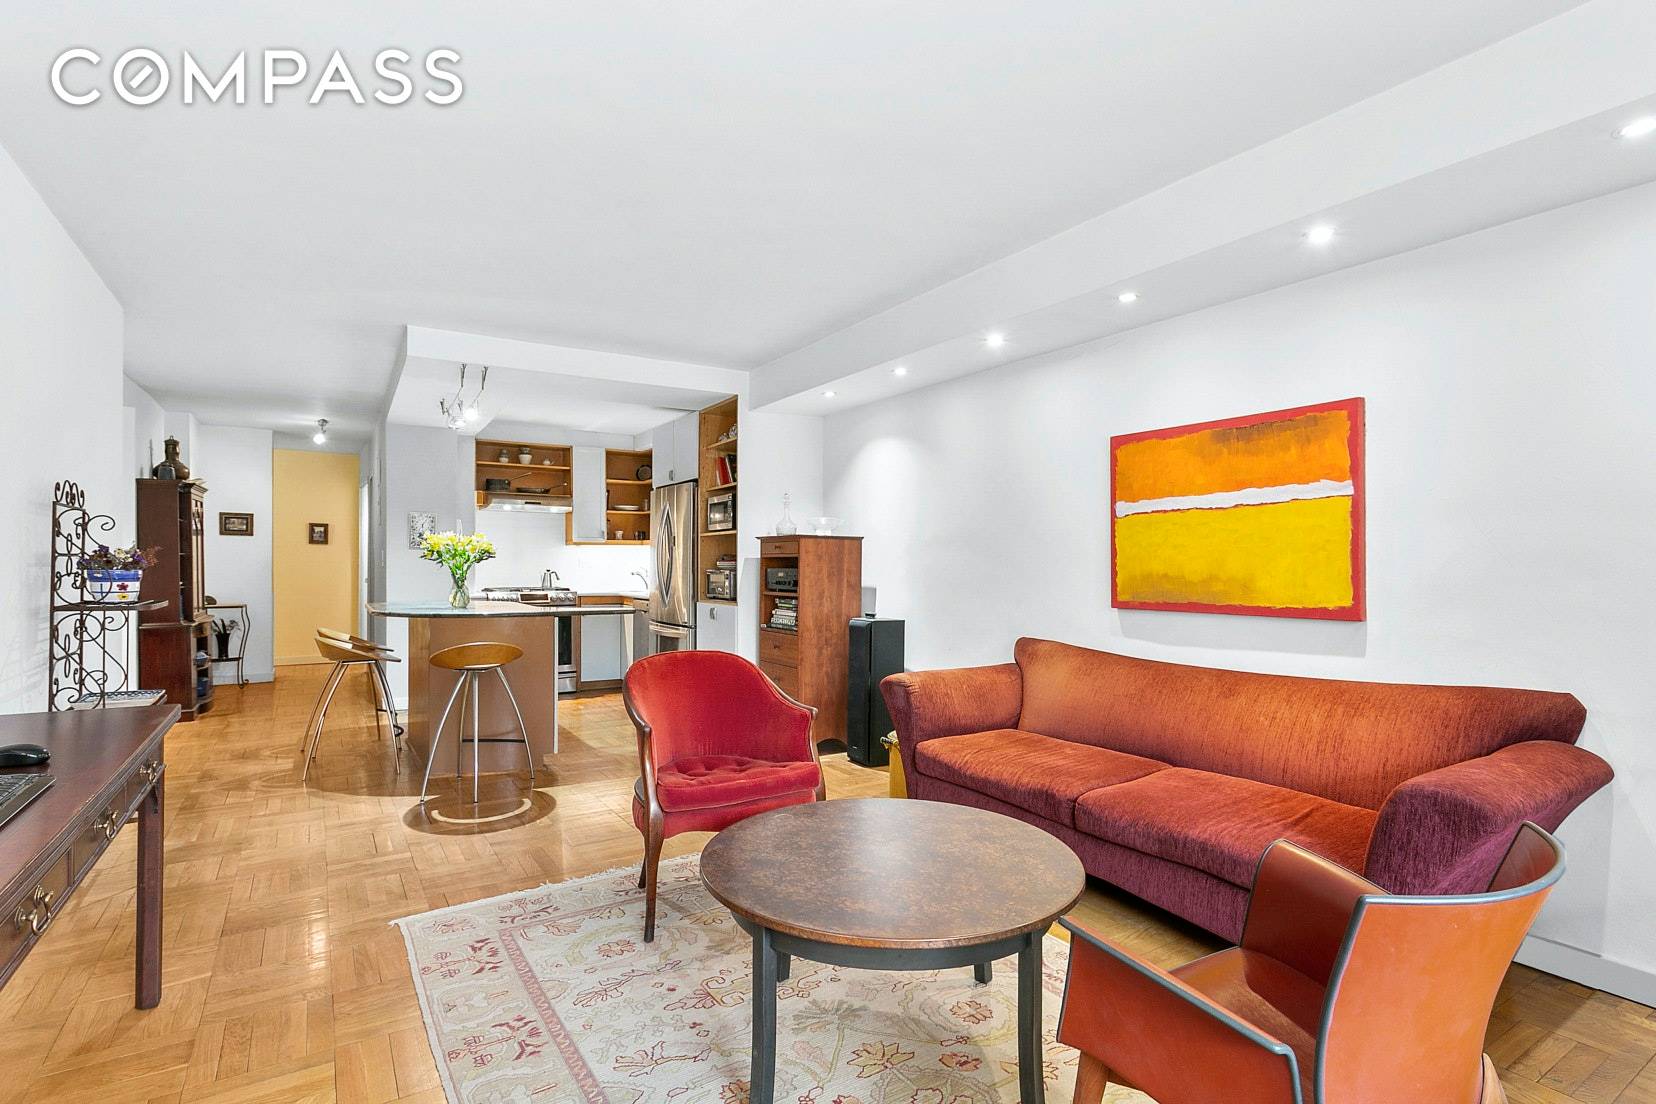 A generously sized two bedroom and two full bath residence with an additional den media room located at 230 East 15th Street in the heart of Gramercy Park.